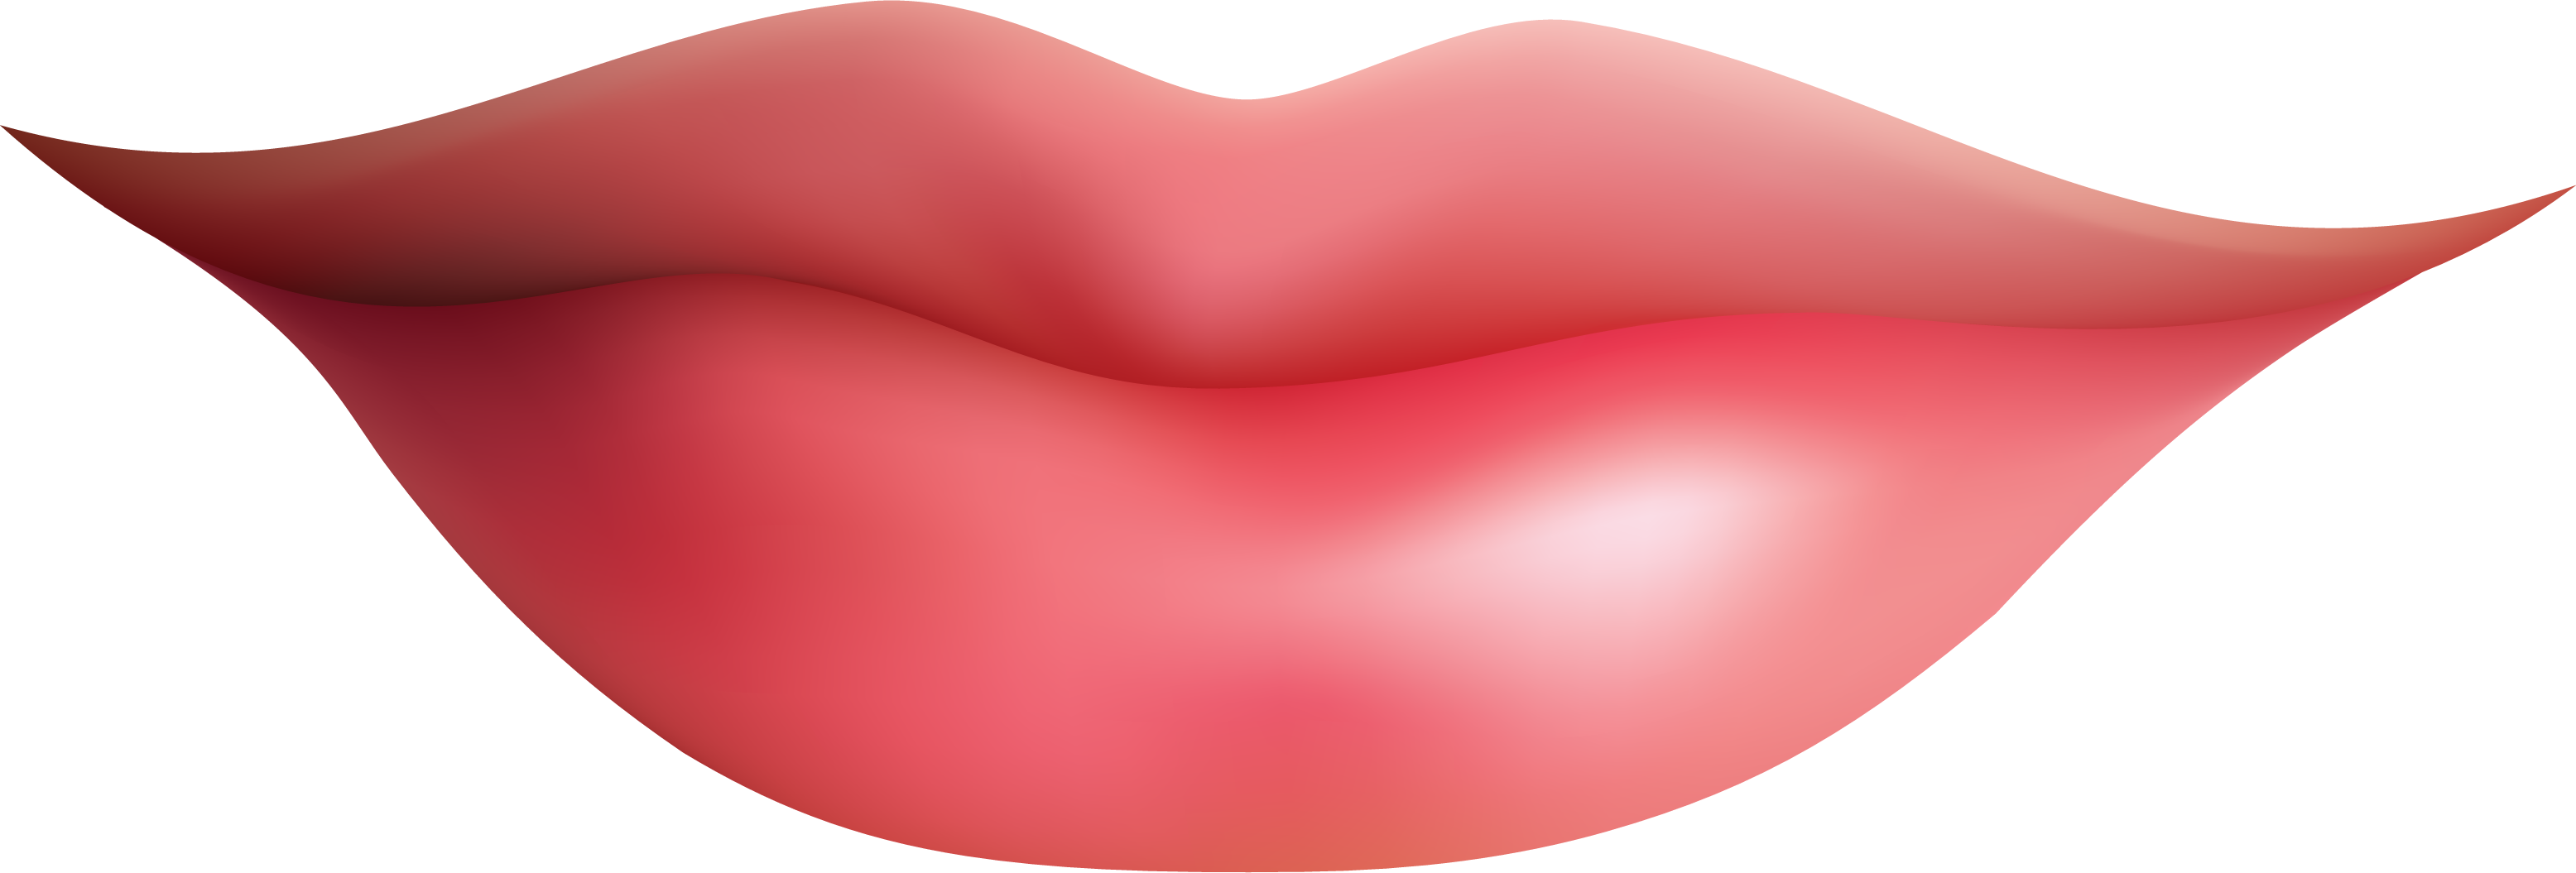 Lips on fire clipart